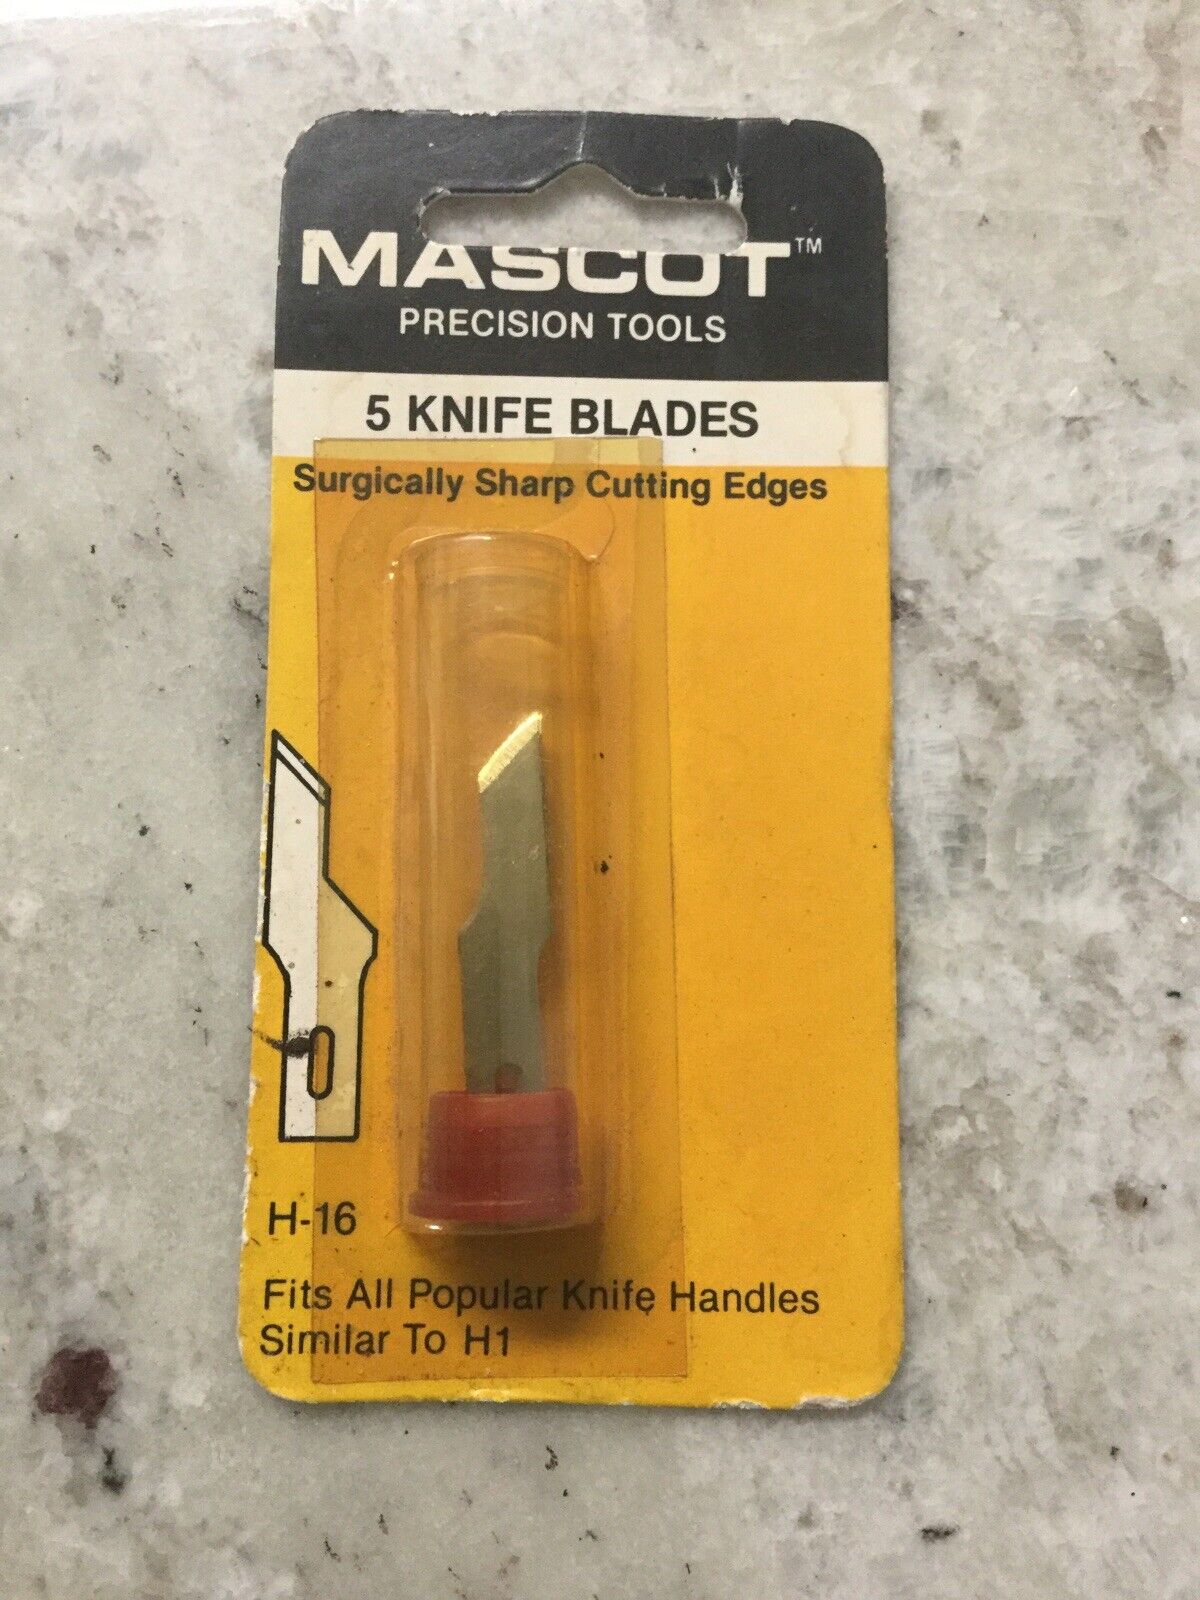 Mascot H-16 Knife Blades Surgically Sharp